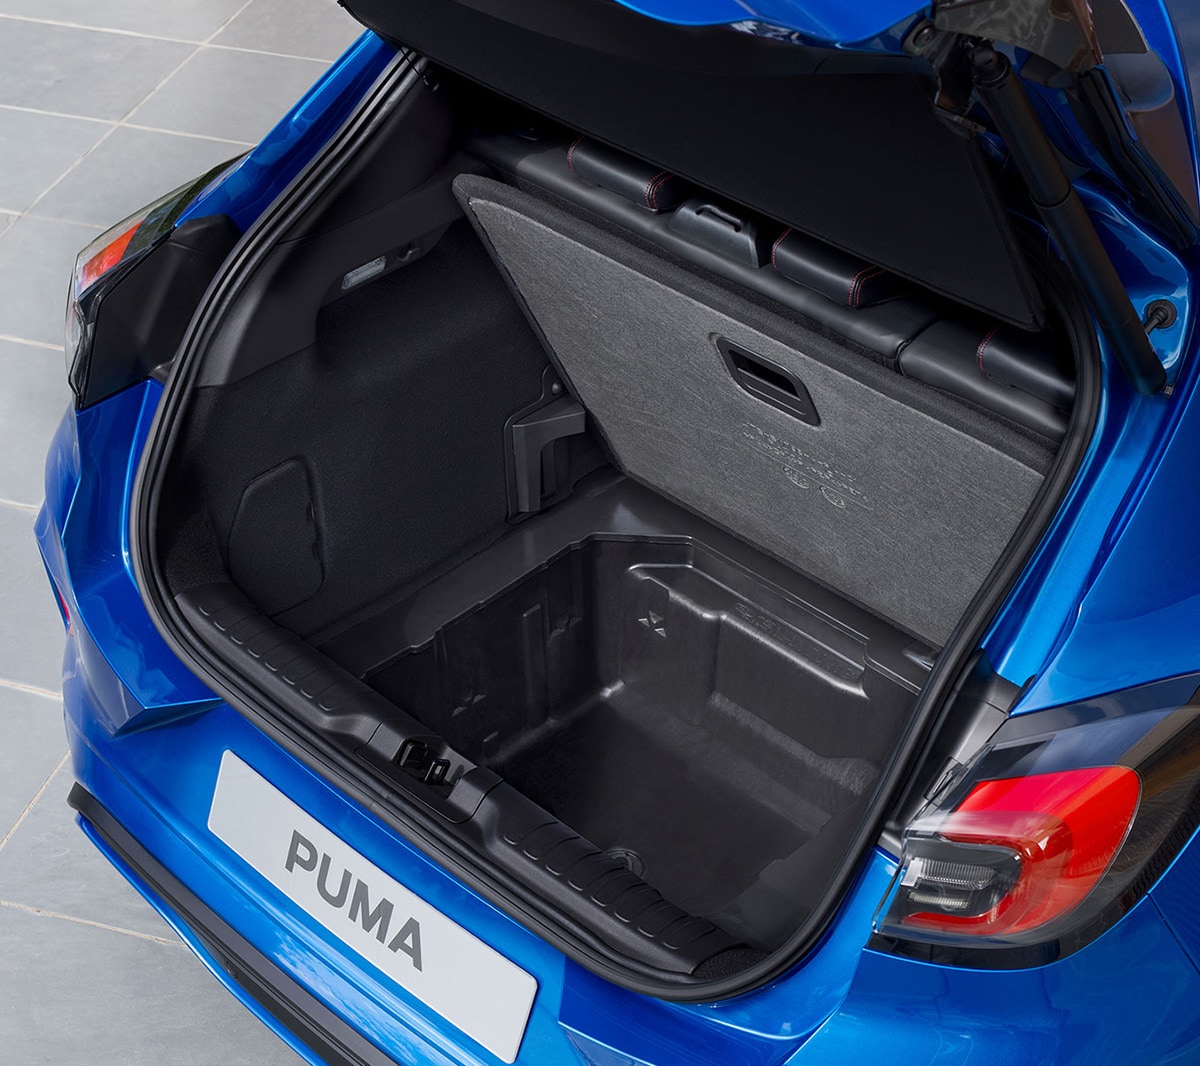 Blue Ford Puma rear view with open boot